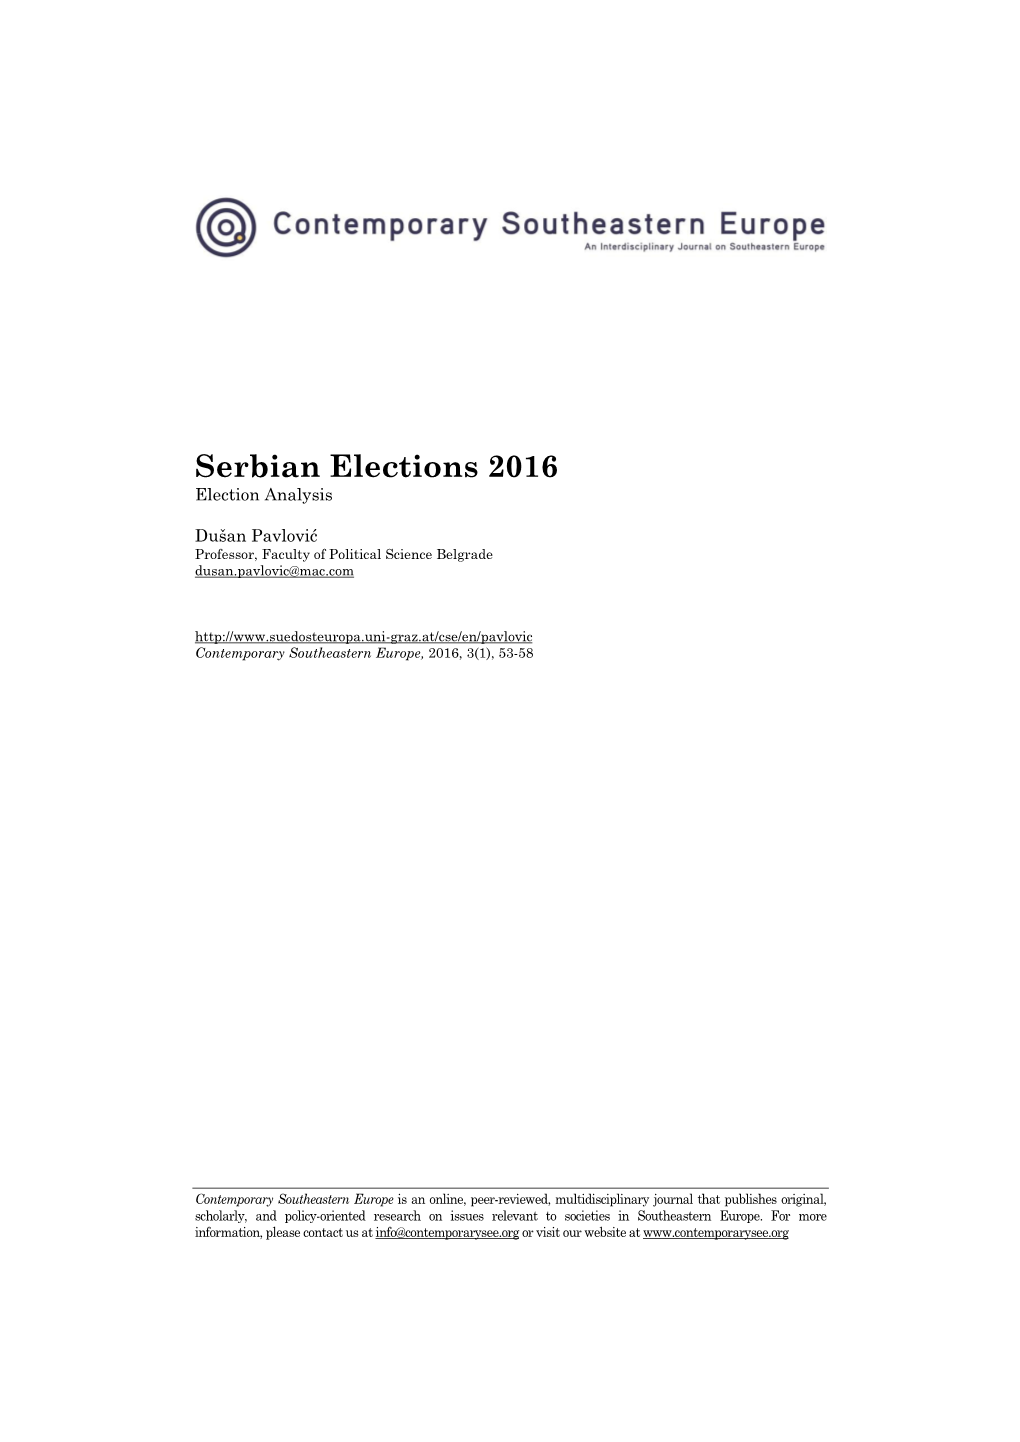 Serbian Elections 2016 Election Analysis